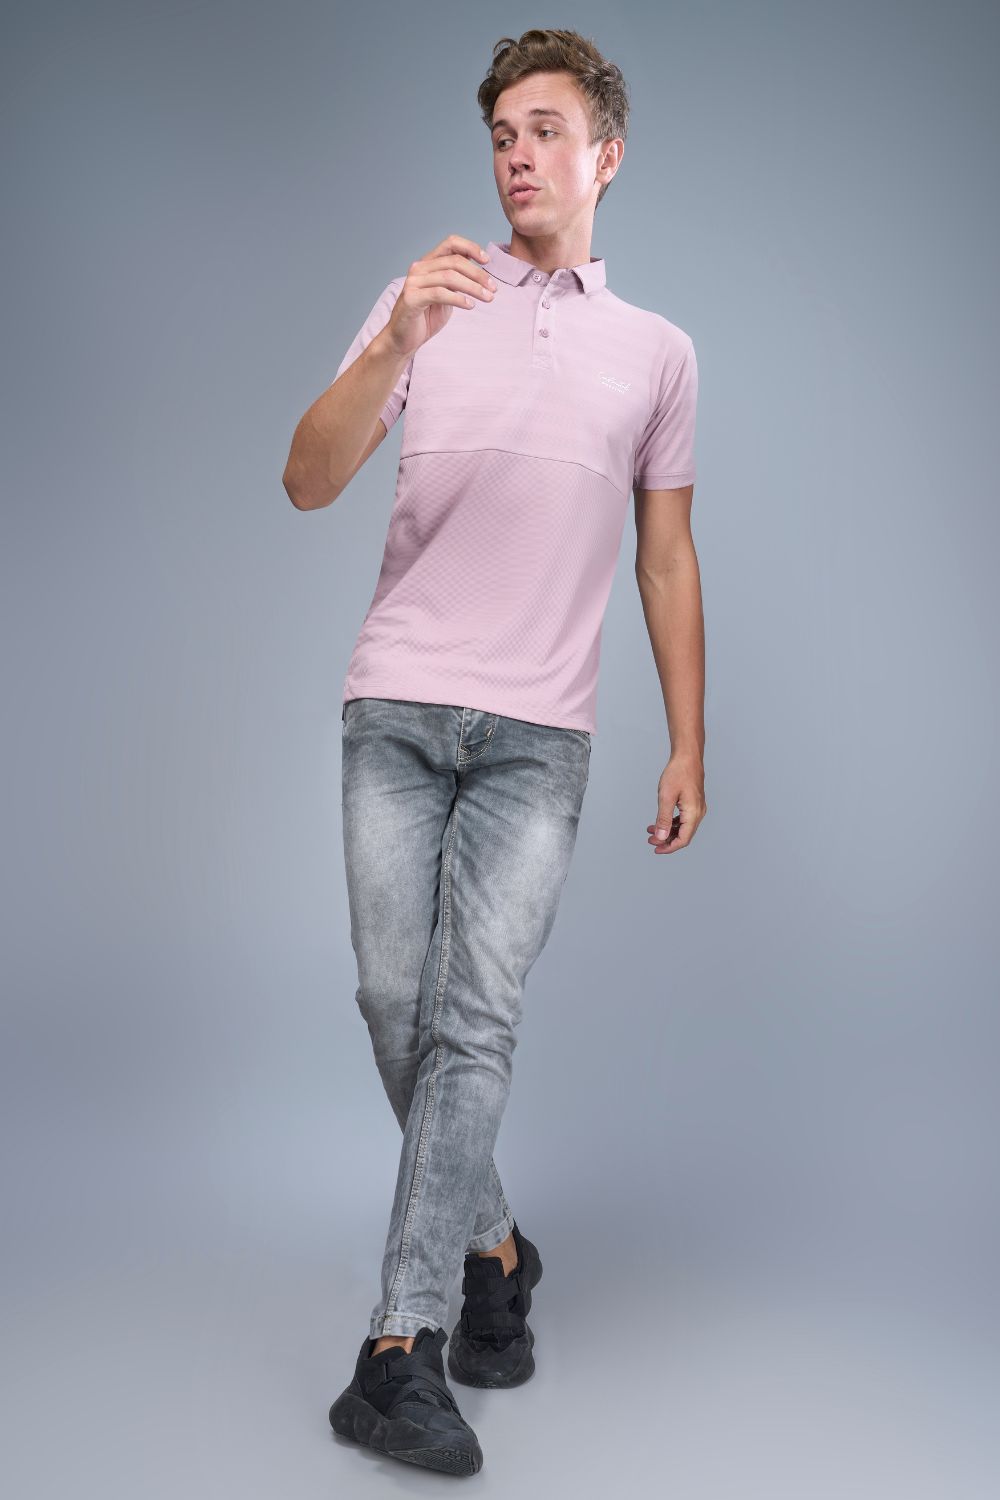 Dusty Lavendar colored, Constructed Polo T-shirts for men with collar and half sleeves.